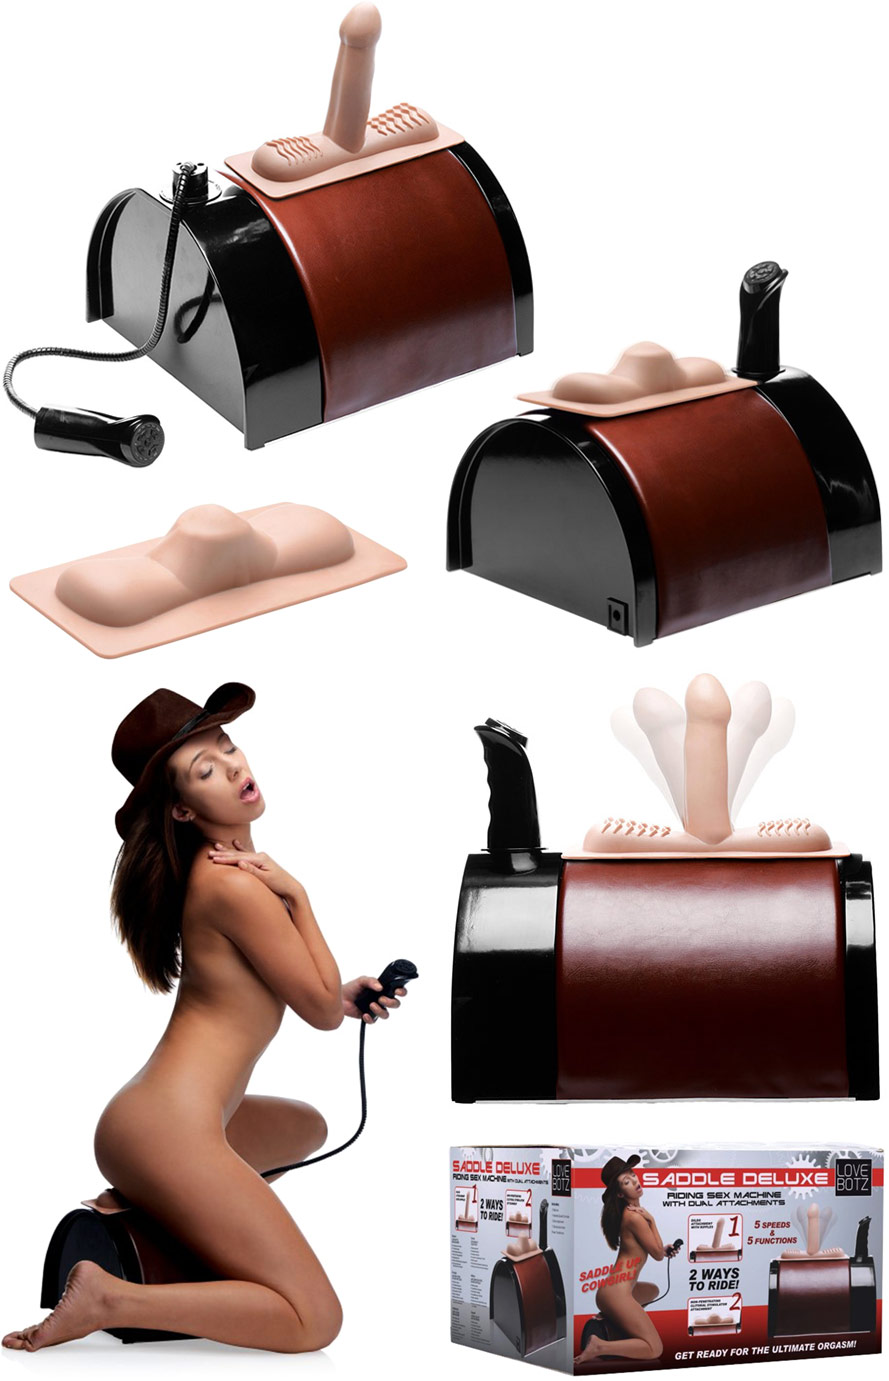 The Saddle Deluxe Sex Machine (with 2 attachments)